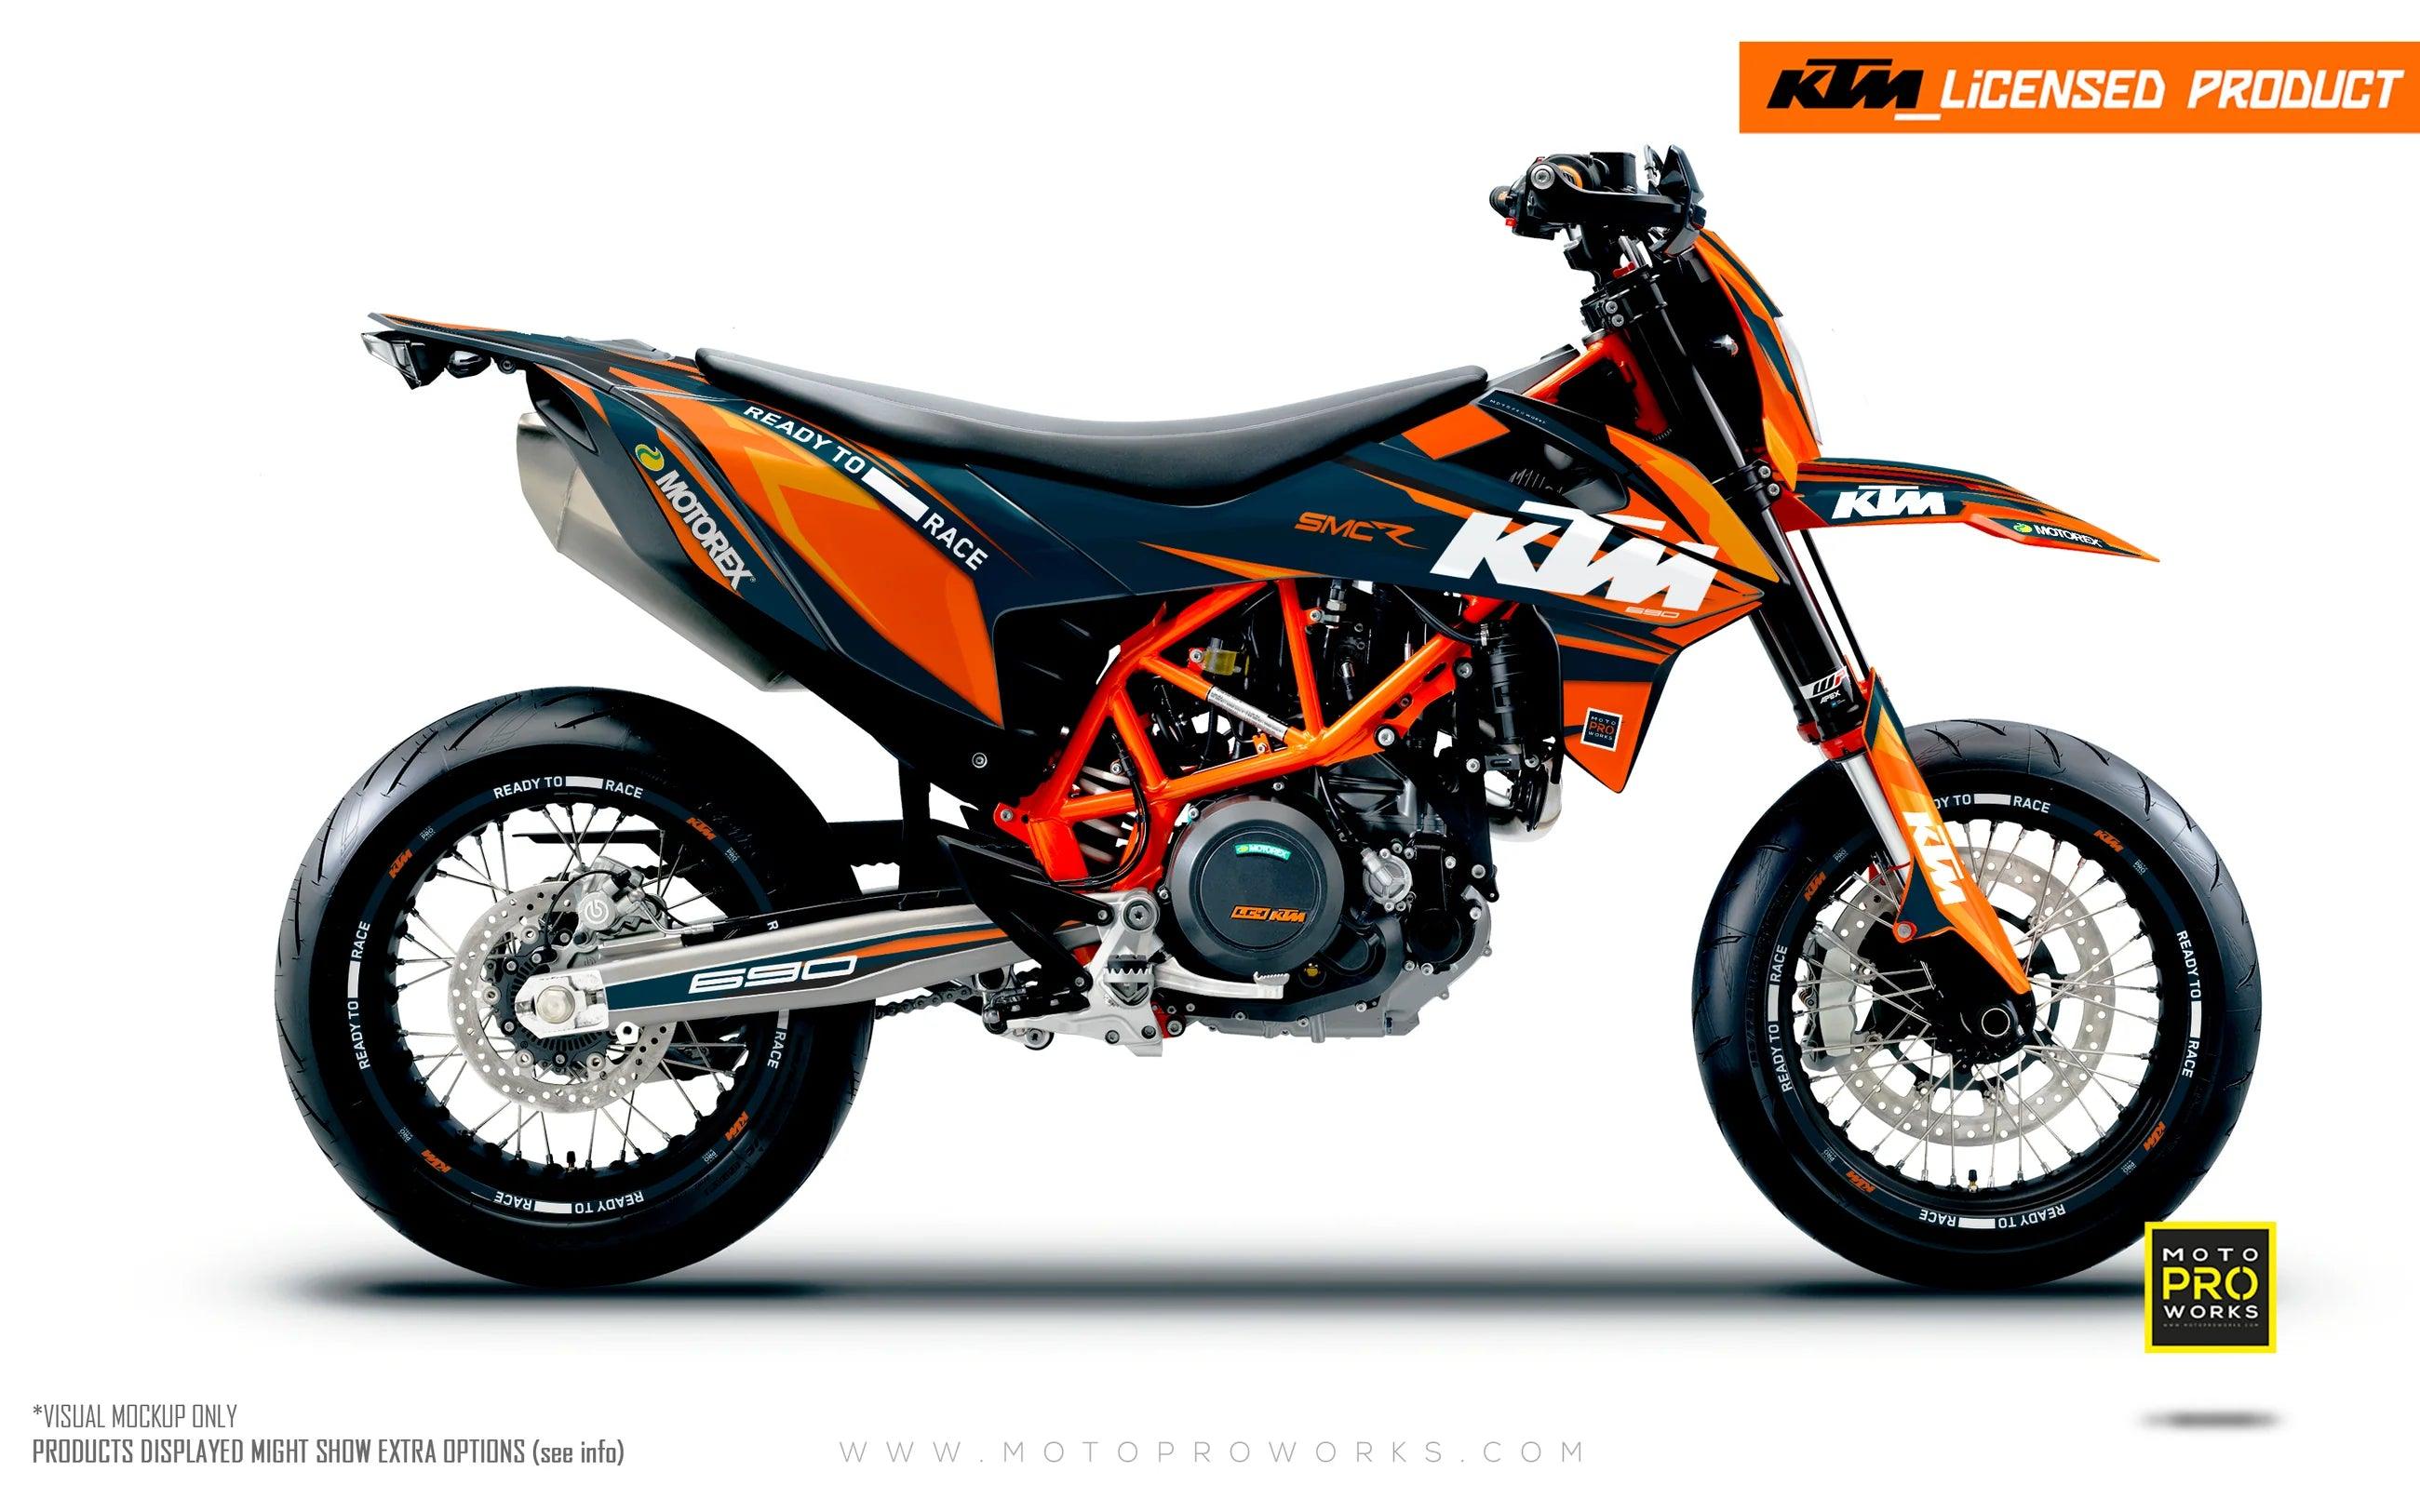 Upgrade Your KTM 690 SMC-R with Premium Graphics Kits - MotoProWorks